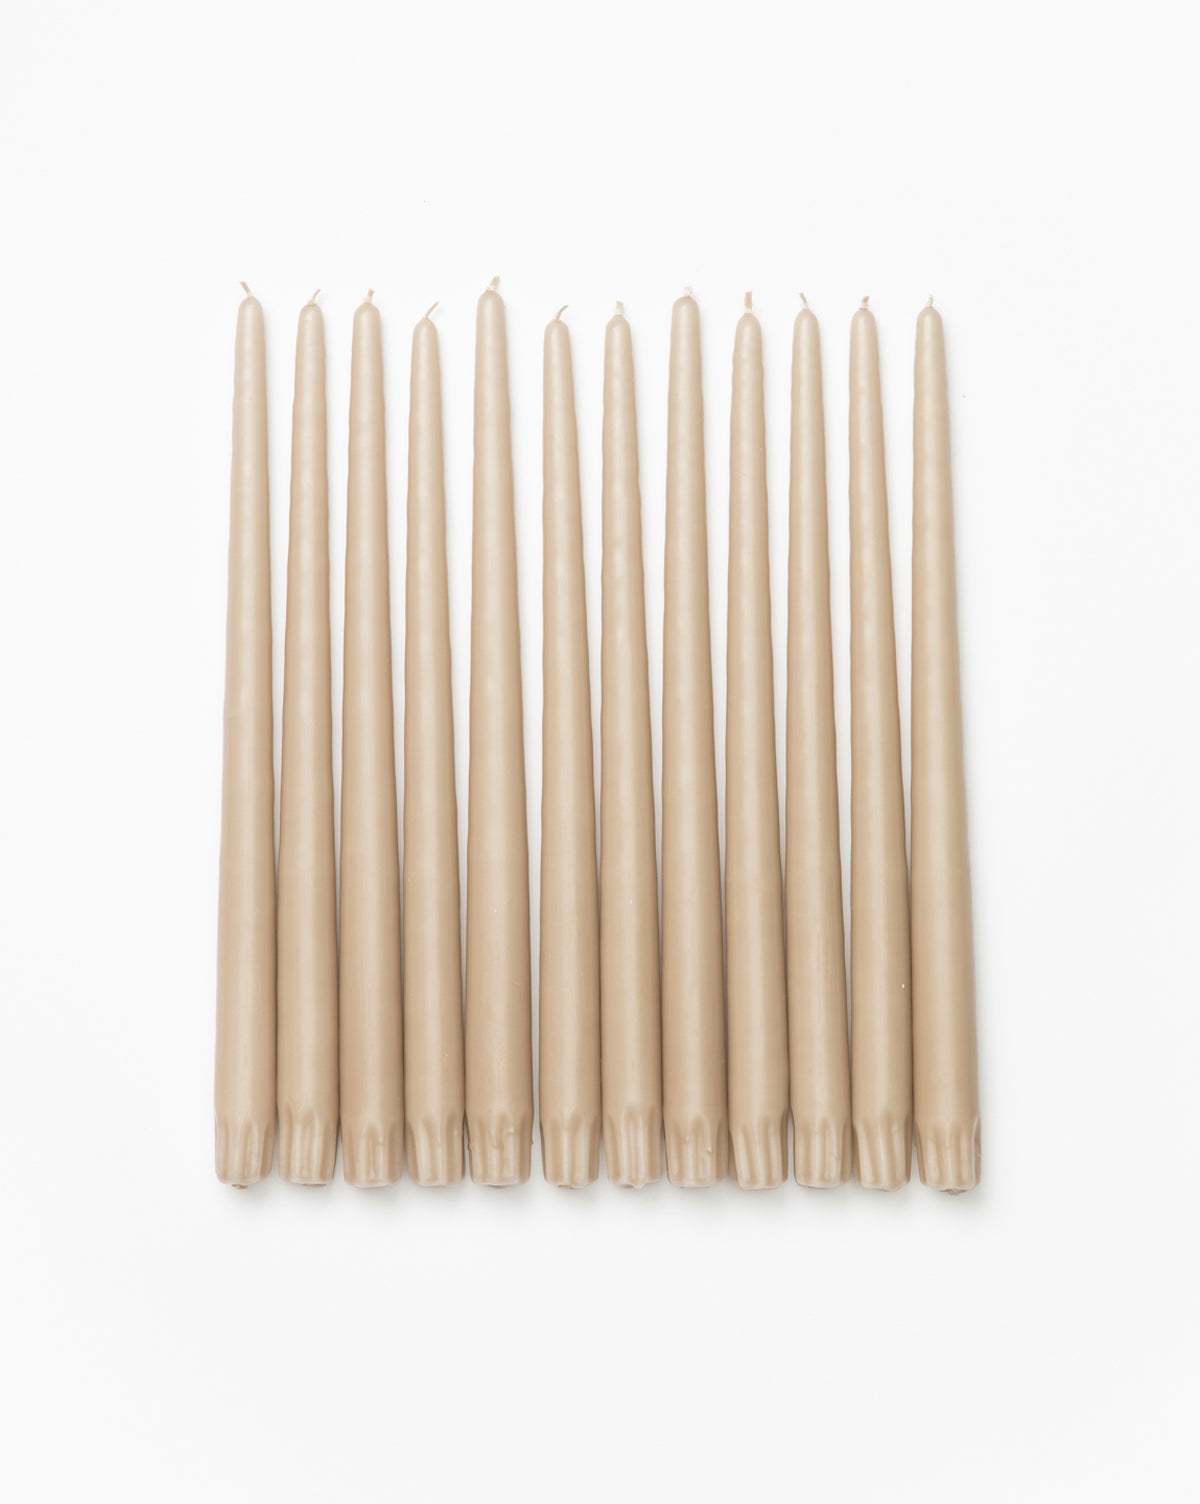 Yummi Candles, Sandstone Taper Candles (Set of 12)